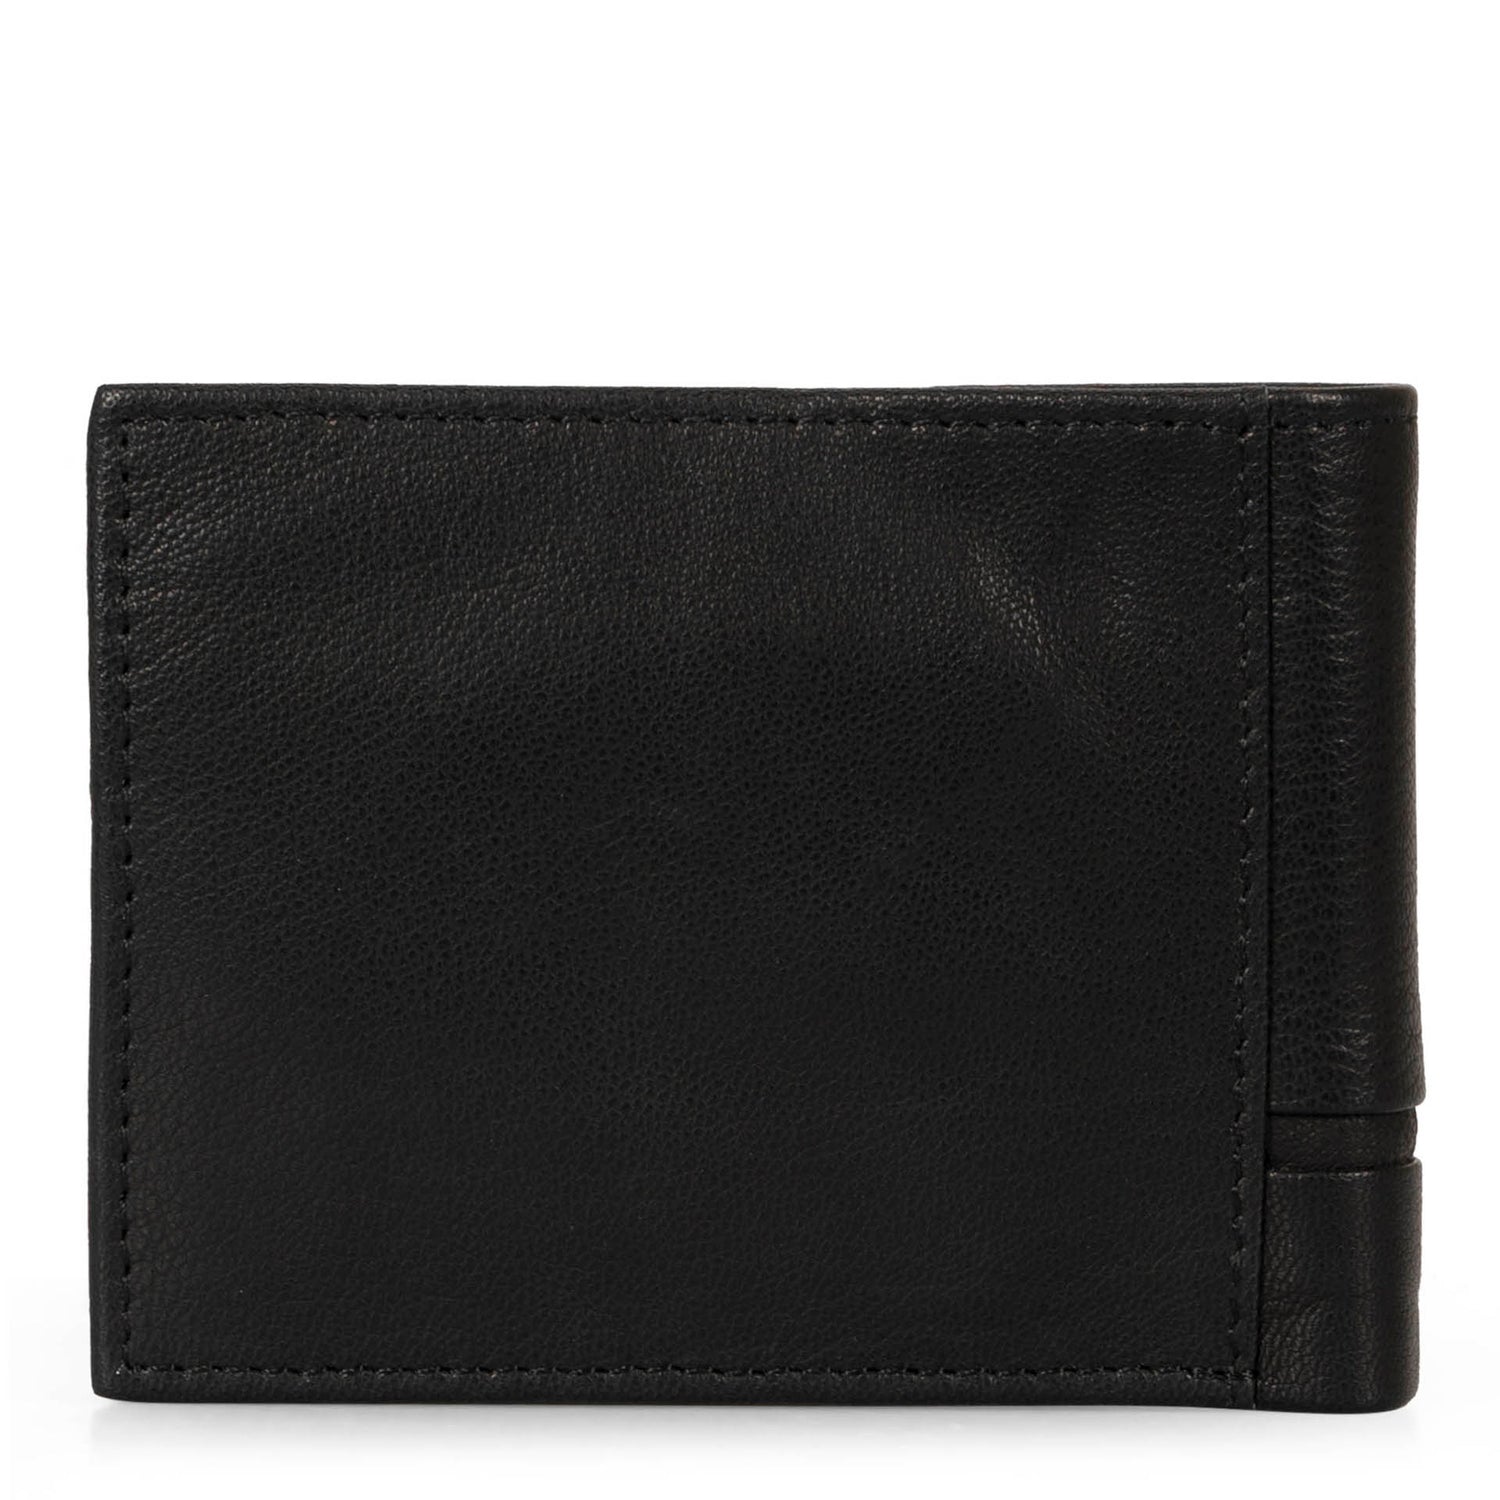 Back side of a black leather wallet called Colwood designed by Pelle, showcasings its supple leather.